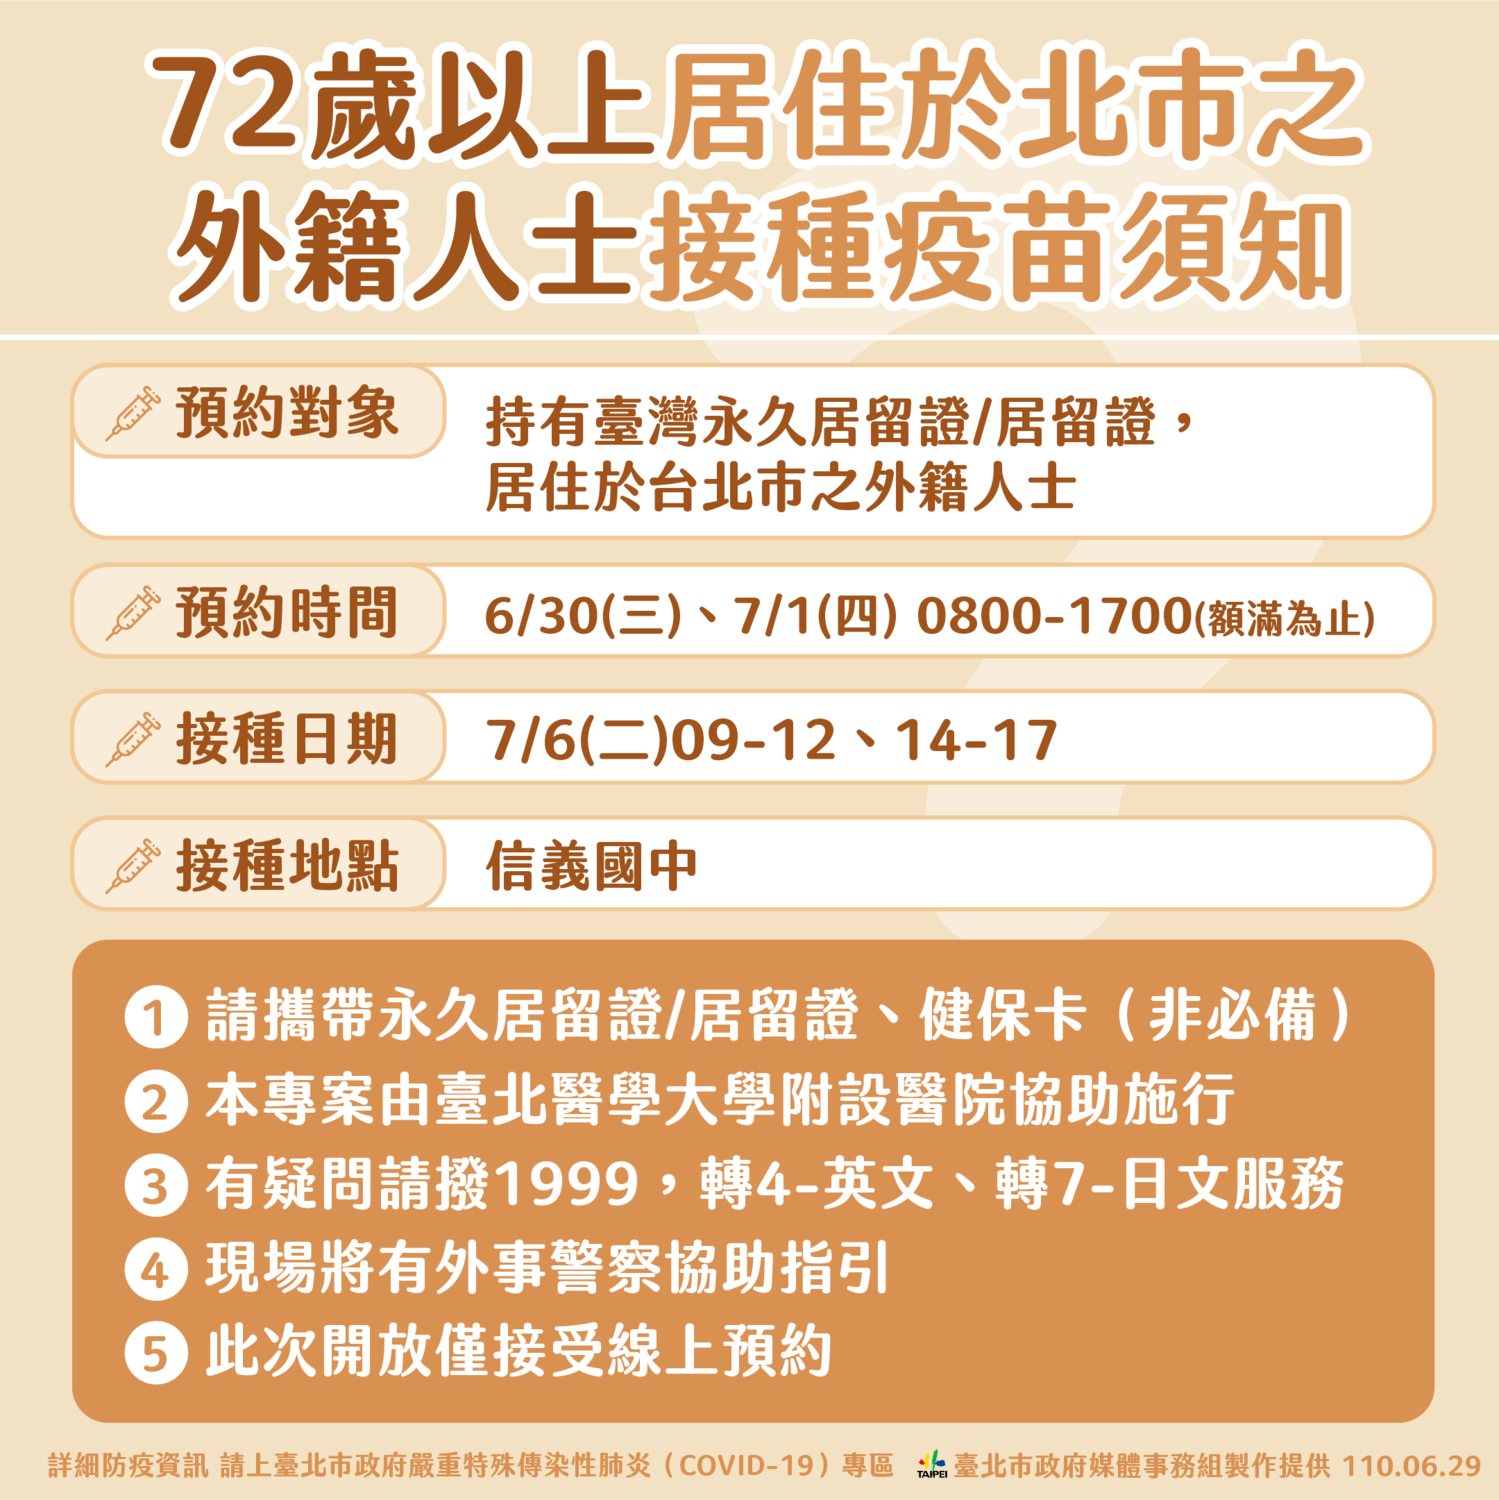 Foreigners can book appointments online on June 30 and July 1. (Photo / Provided by the Taipei City Government)